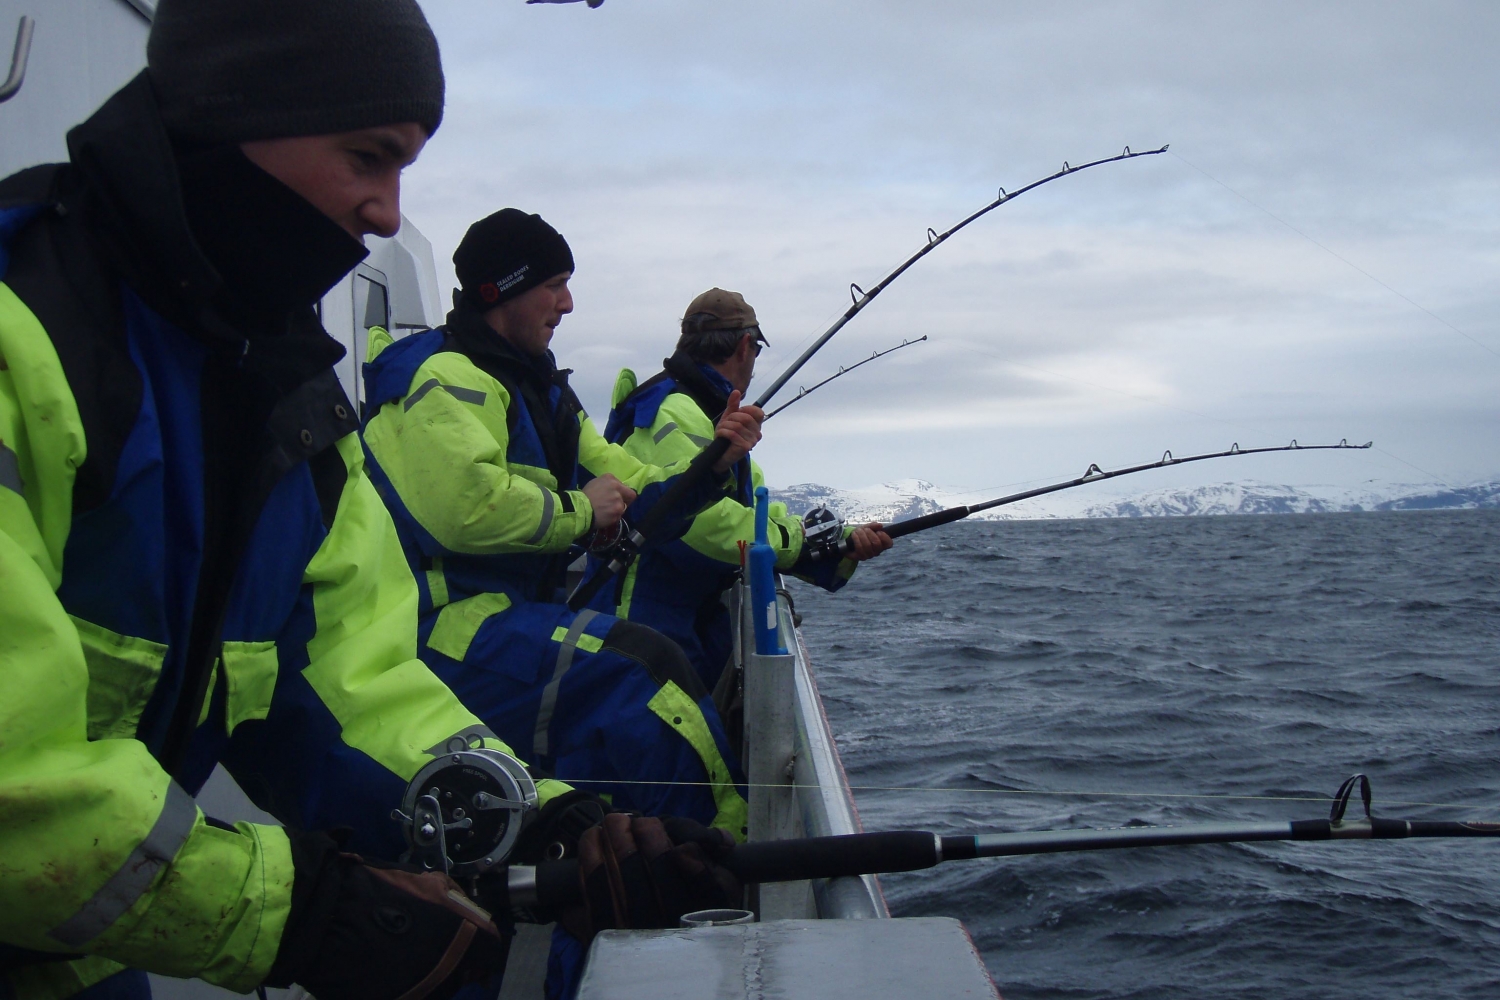 Guests fishing with fishing rods